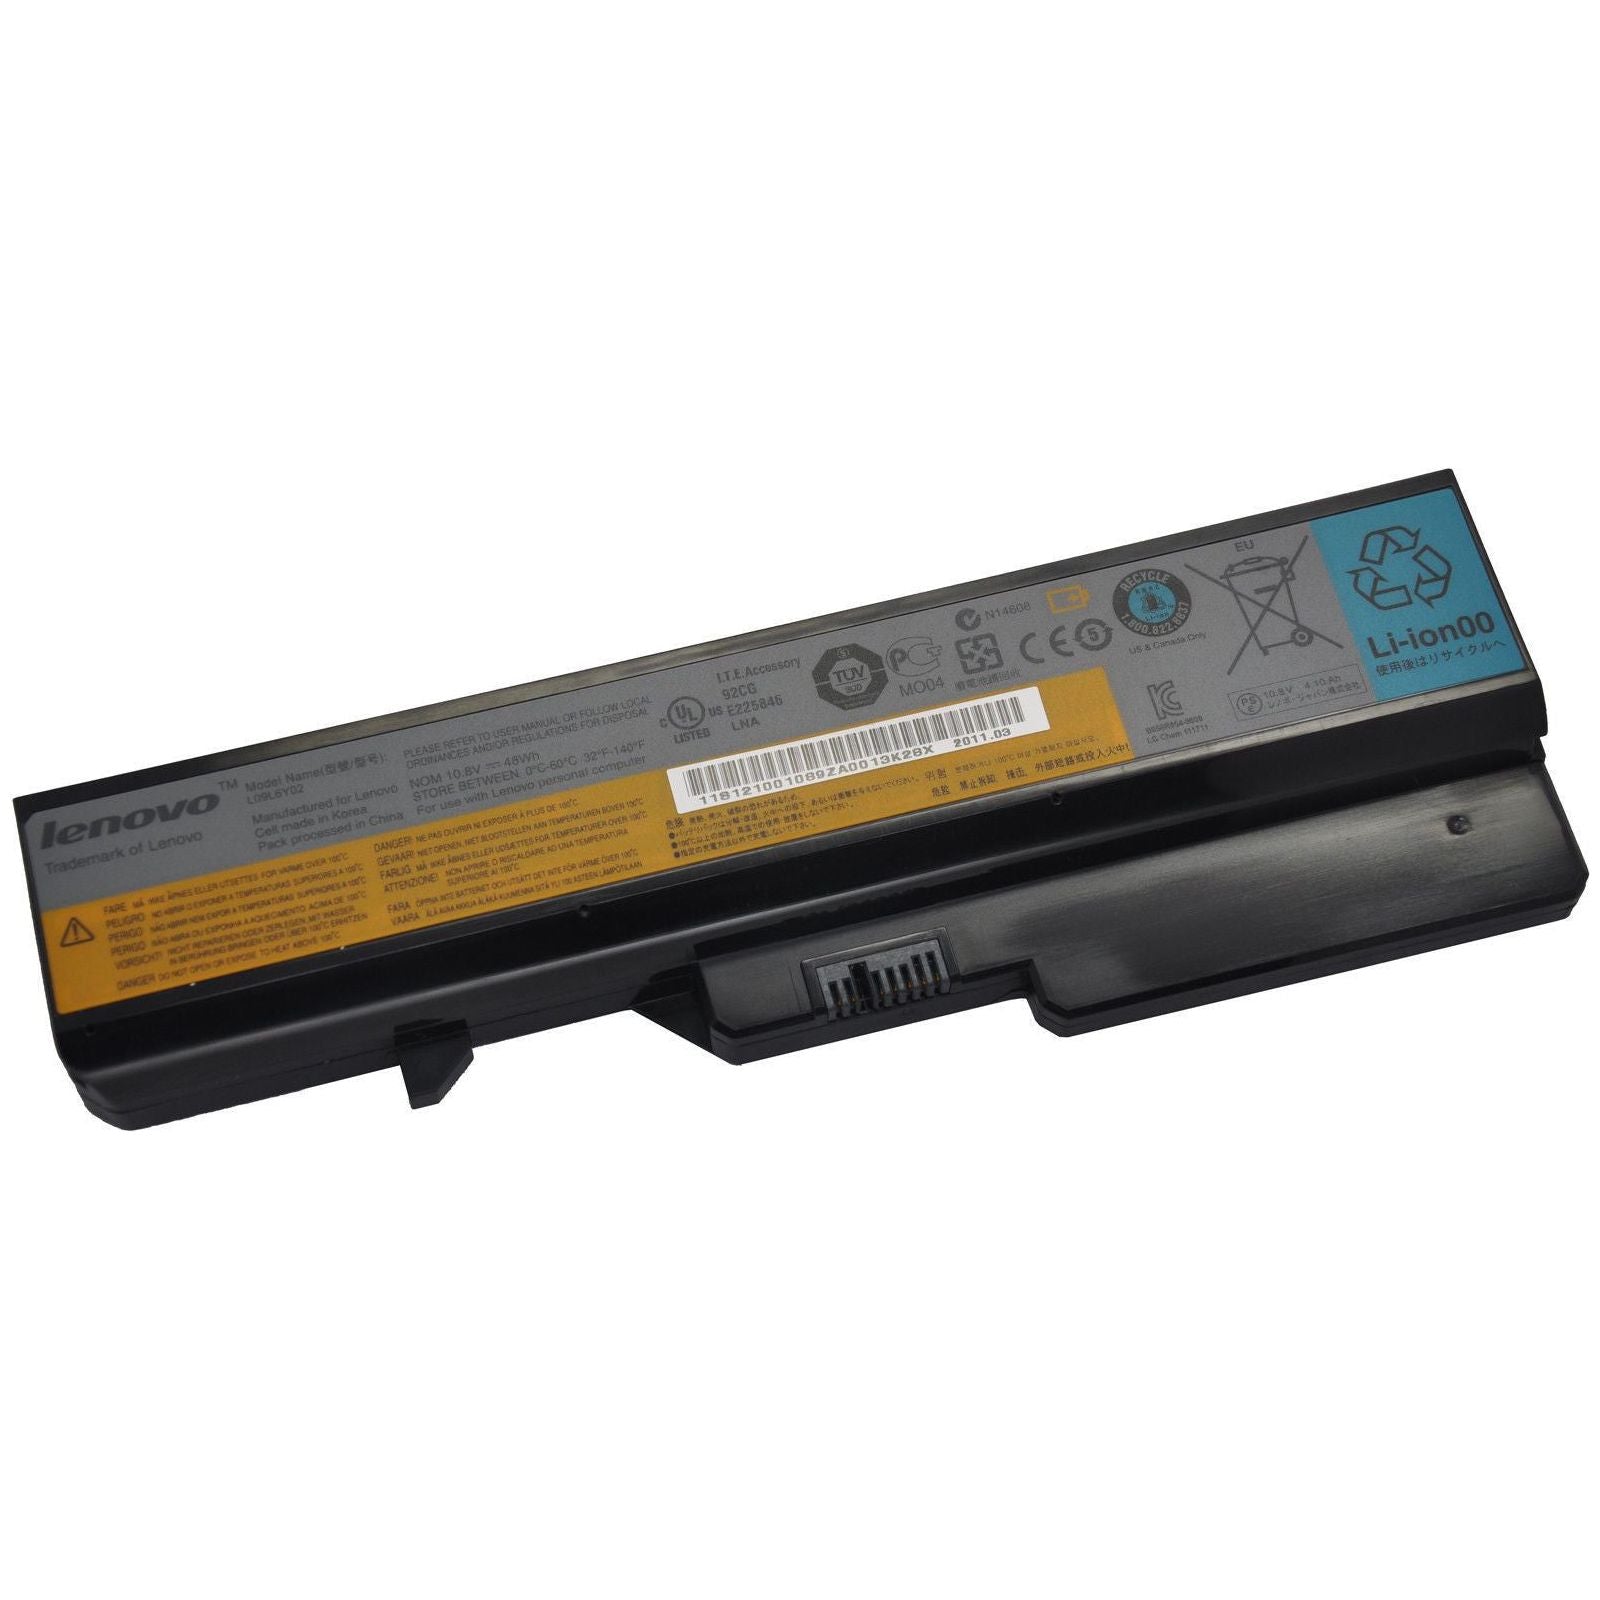 New Genuine Lenovo IdeaPad V570 V570A V570G V570P E47 G770 K47 V475 Battery 58Wh